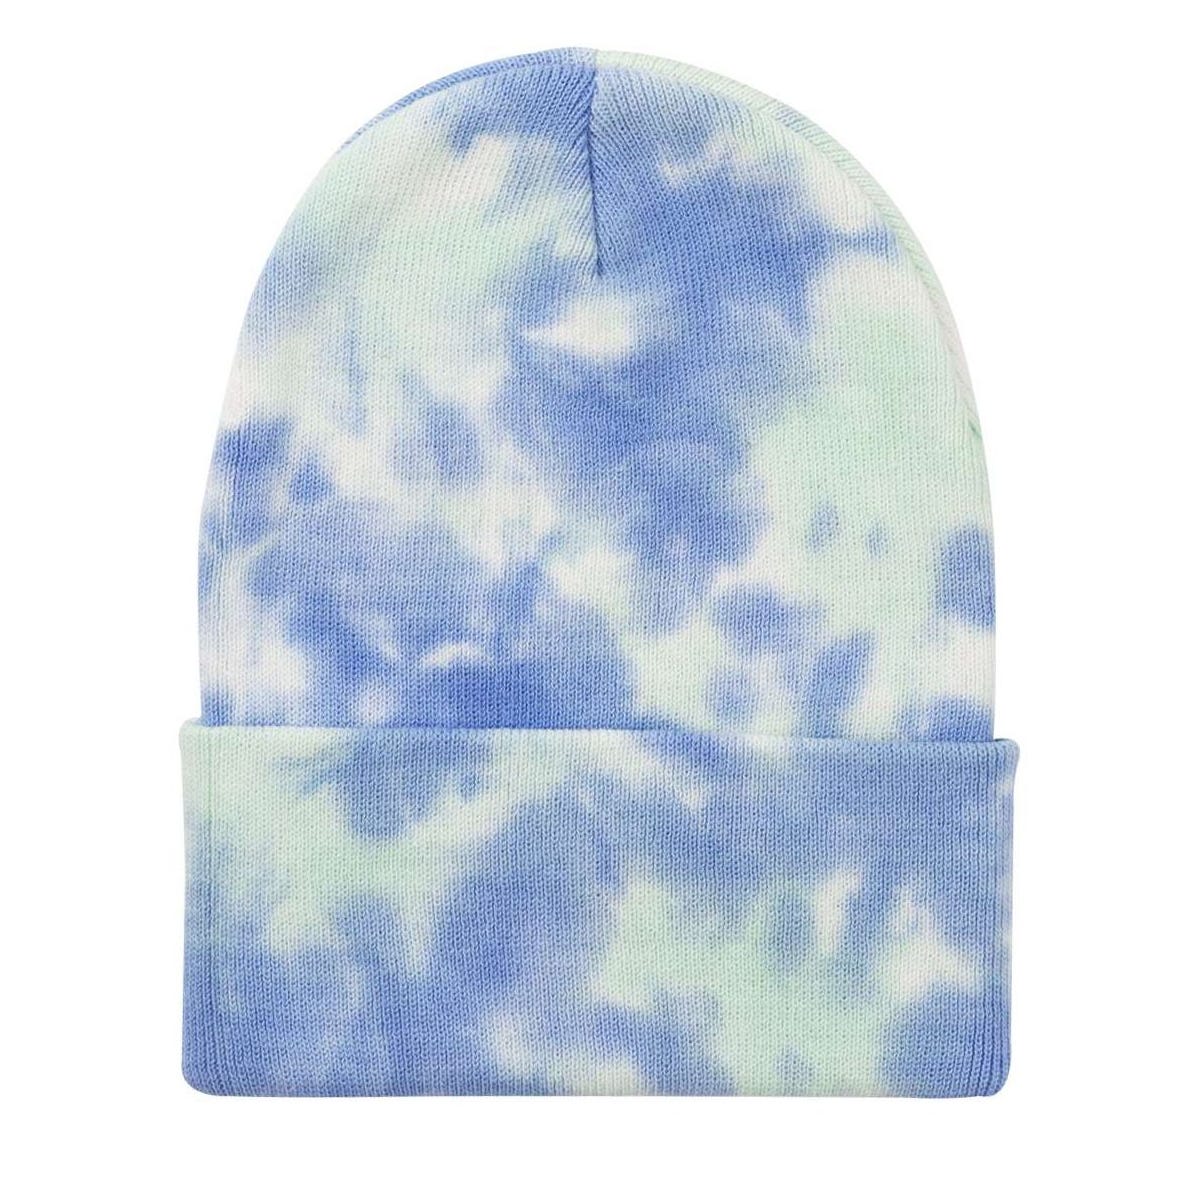 My Body Is A Machine That Turns Cigarettes Into Smoked Cigarettes Tie Dye 12" Knit Beanie